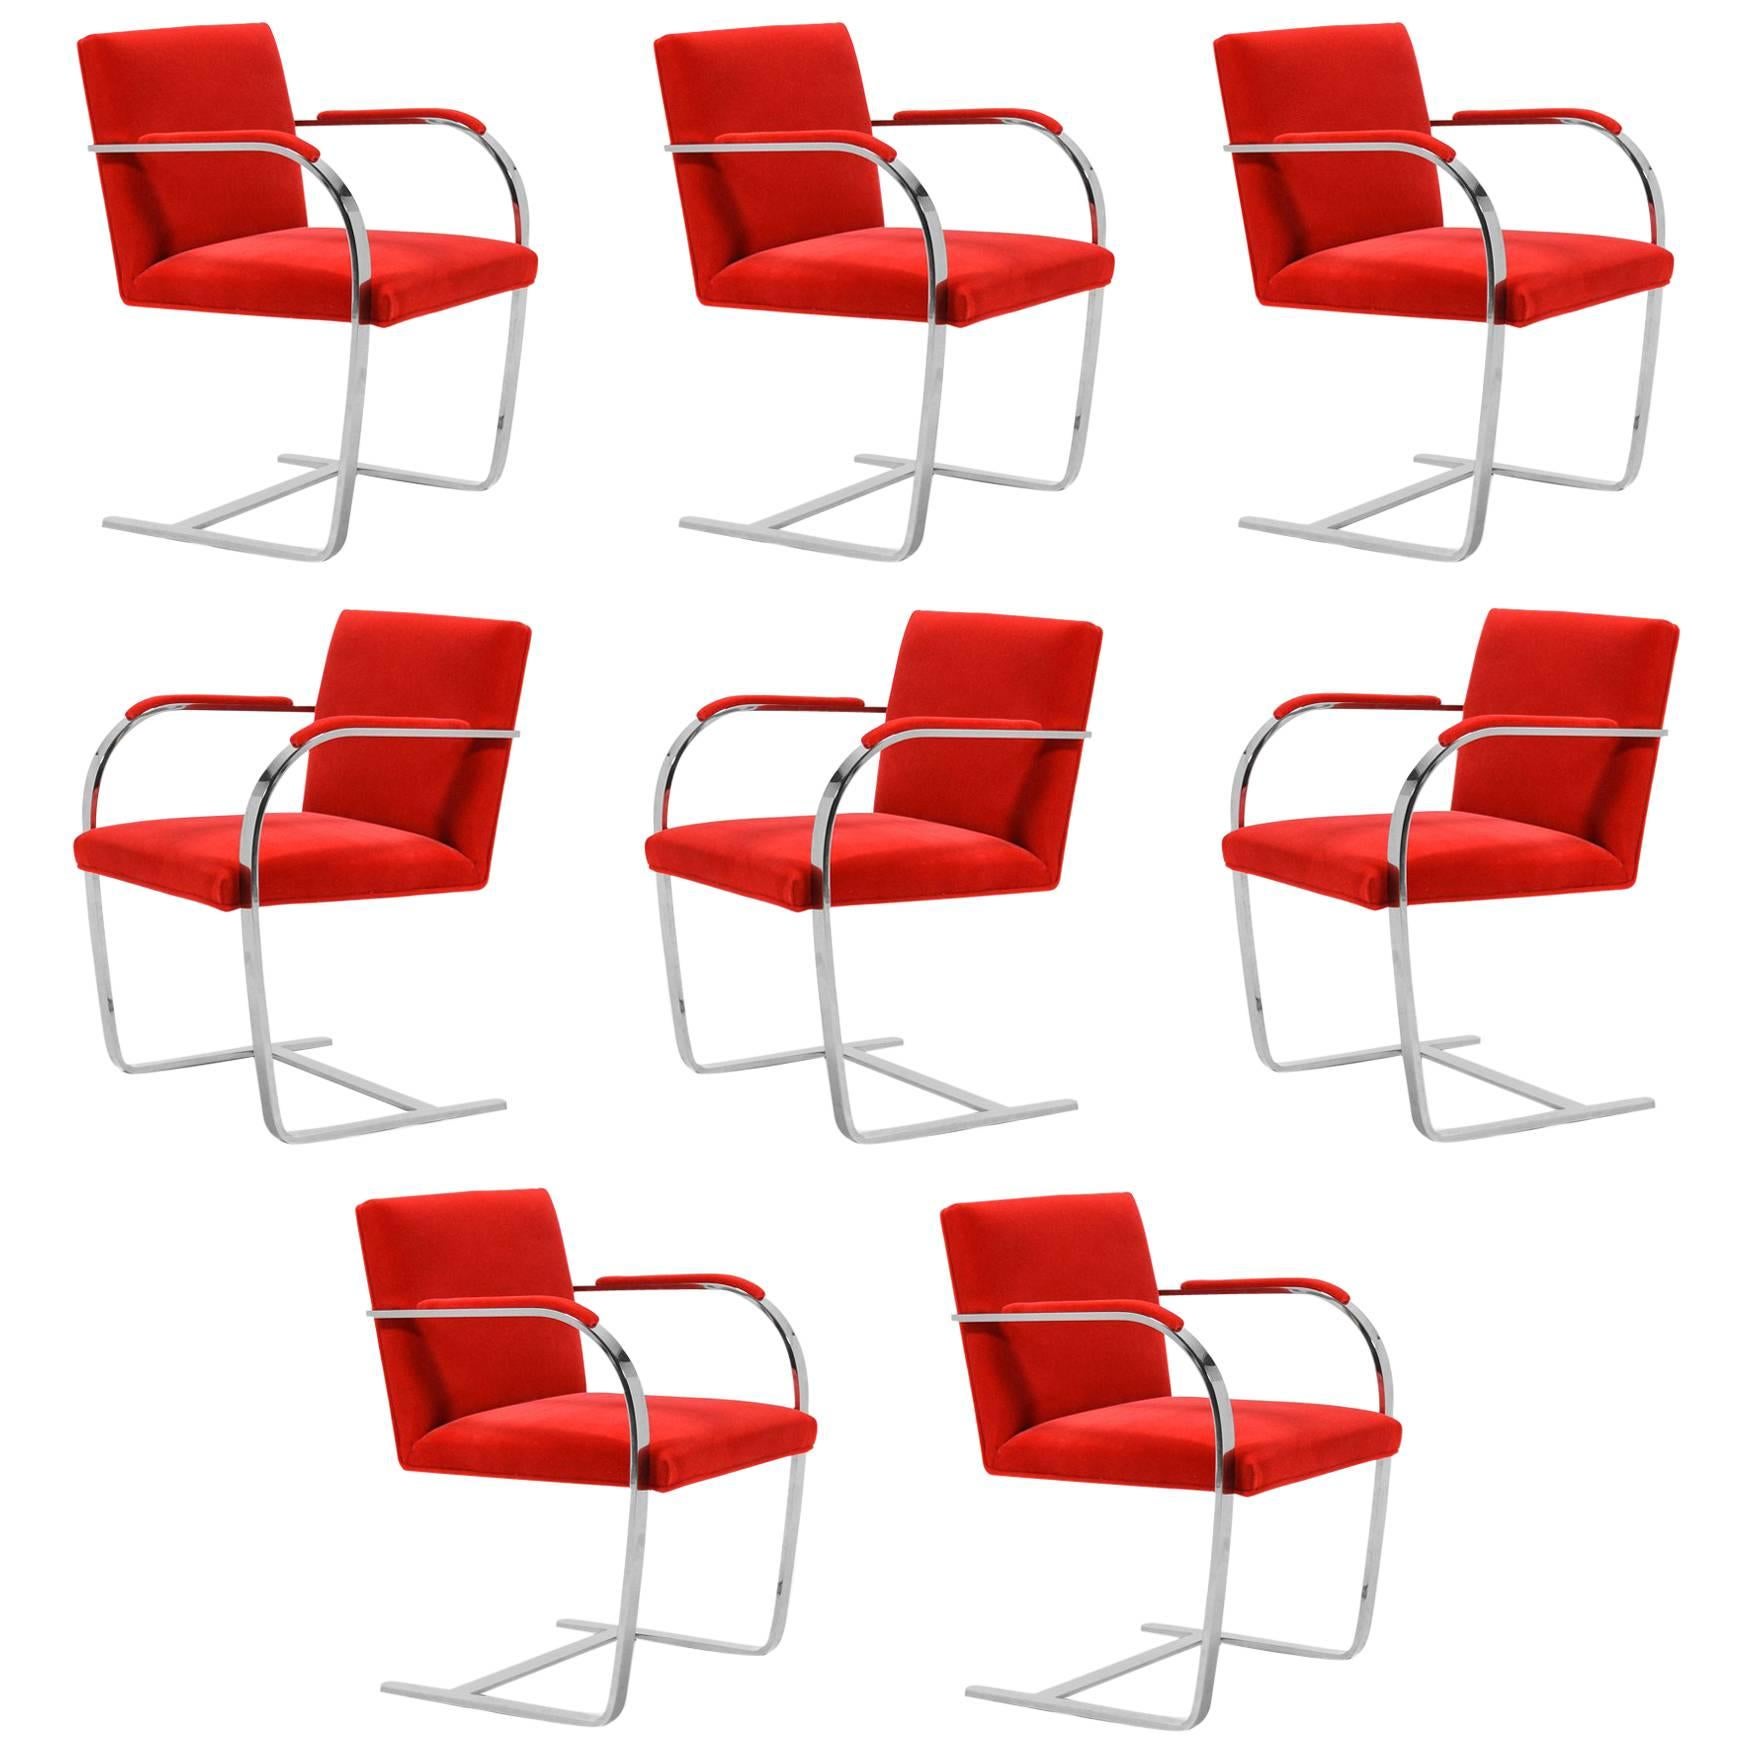 Ludwig Mies van der Rohe Set of Eight Stainless Steel Brno Chairs by Knoll